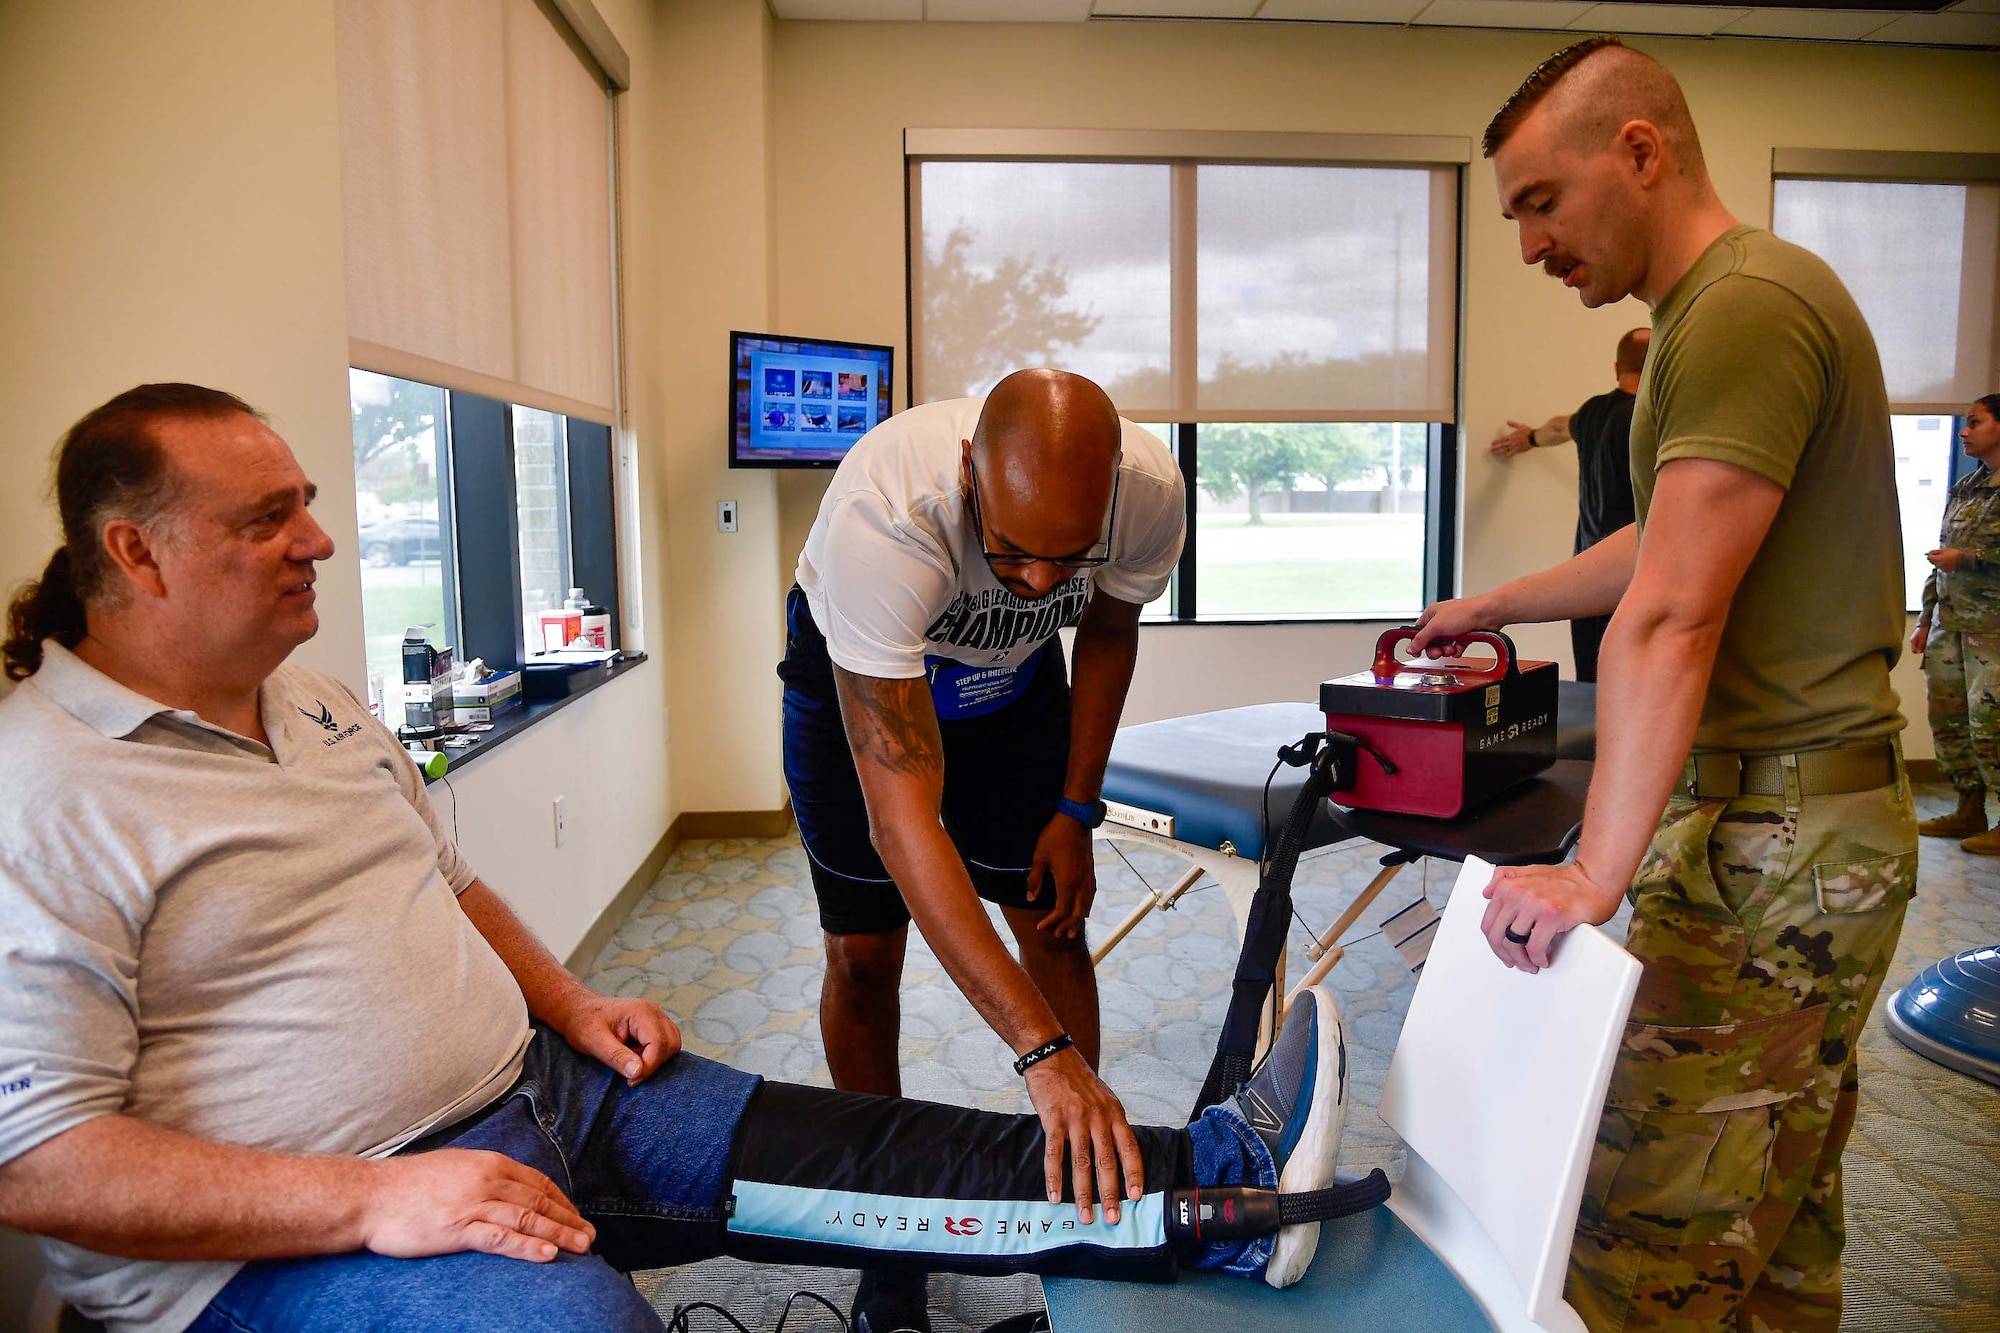 Airmen from the 436th Operational Medical Readiness Squadron use a cold compression machine during the Human Performance and Wellness Event at Dover Air Force Base, Delaware, Sept. 8, 2022. Hosted by the 436th OMRS human performance flight, the event featured walk-in physical therapy appointments, glucose tests, a running clinic and booths from agencies around base. (U.S. Air Force photo by Senior Airman Faith Barron)